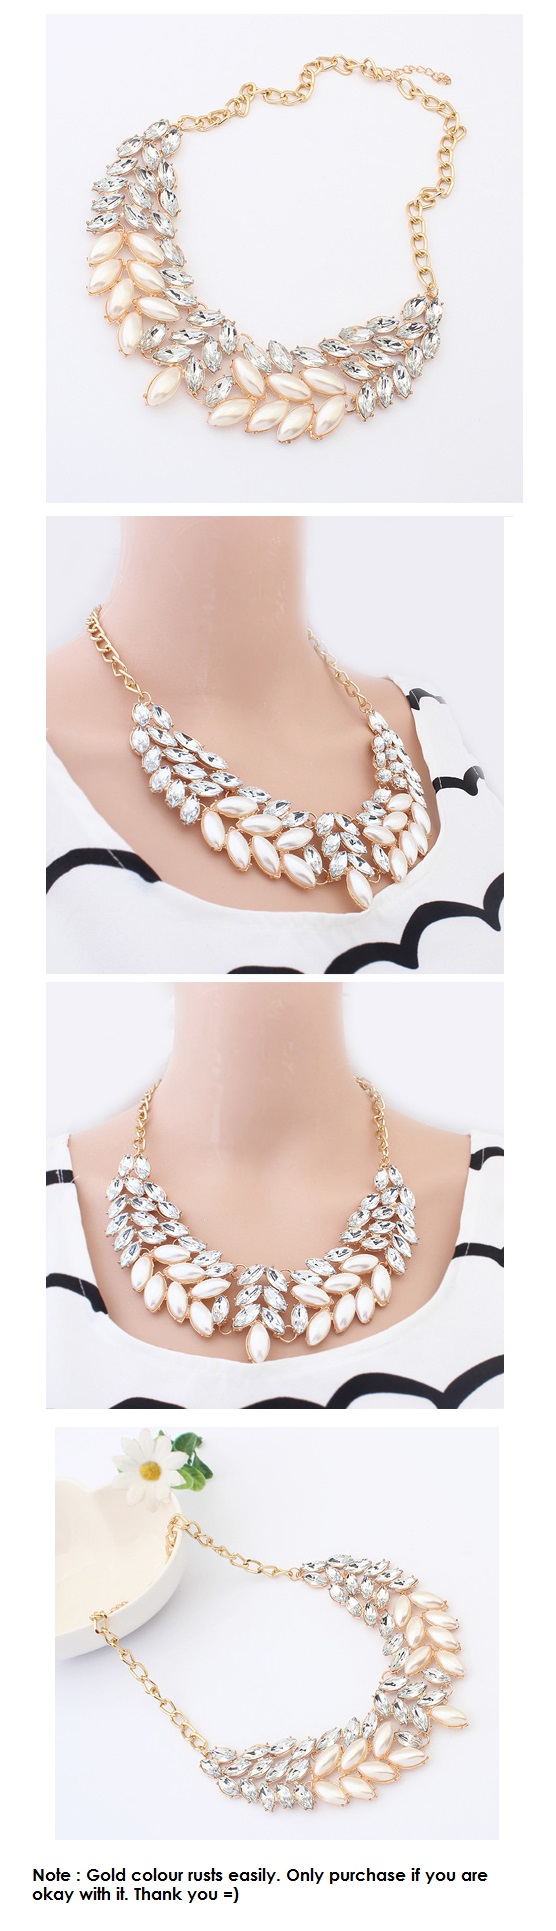 A-Q-9029 Shiny pearly crystals wing statement necklace malaysia